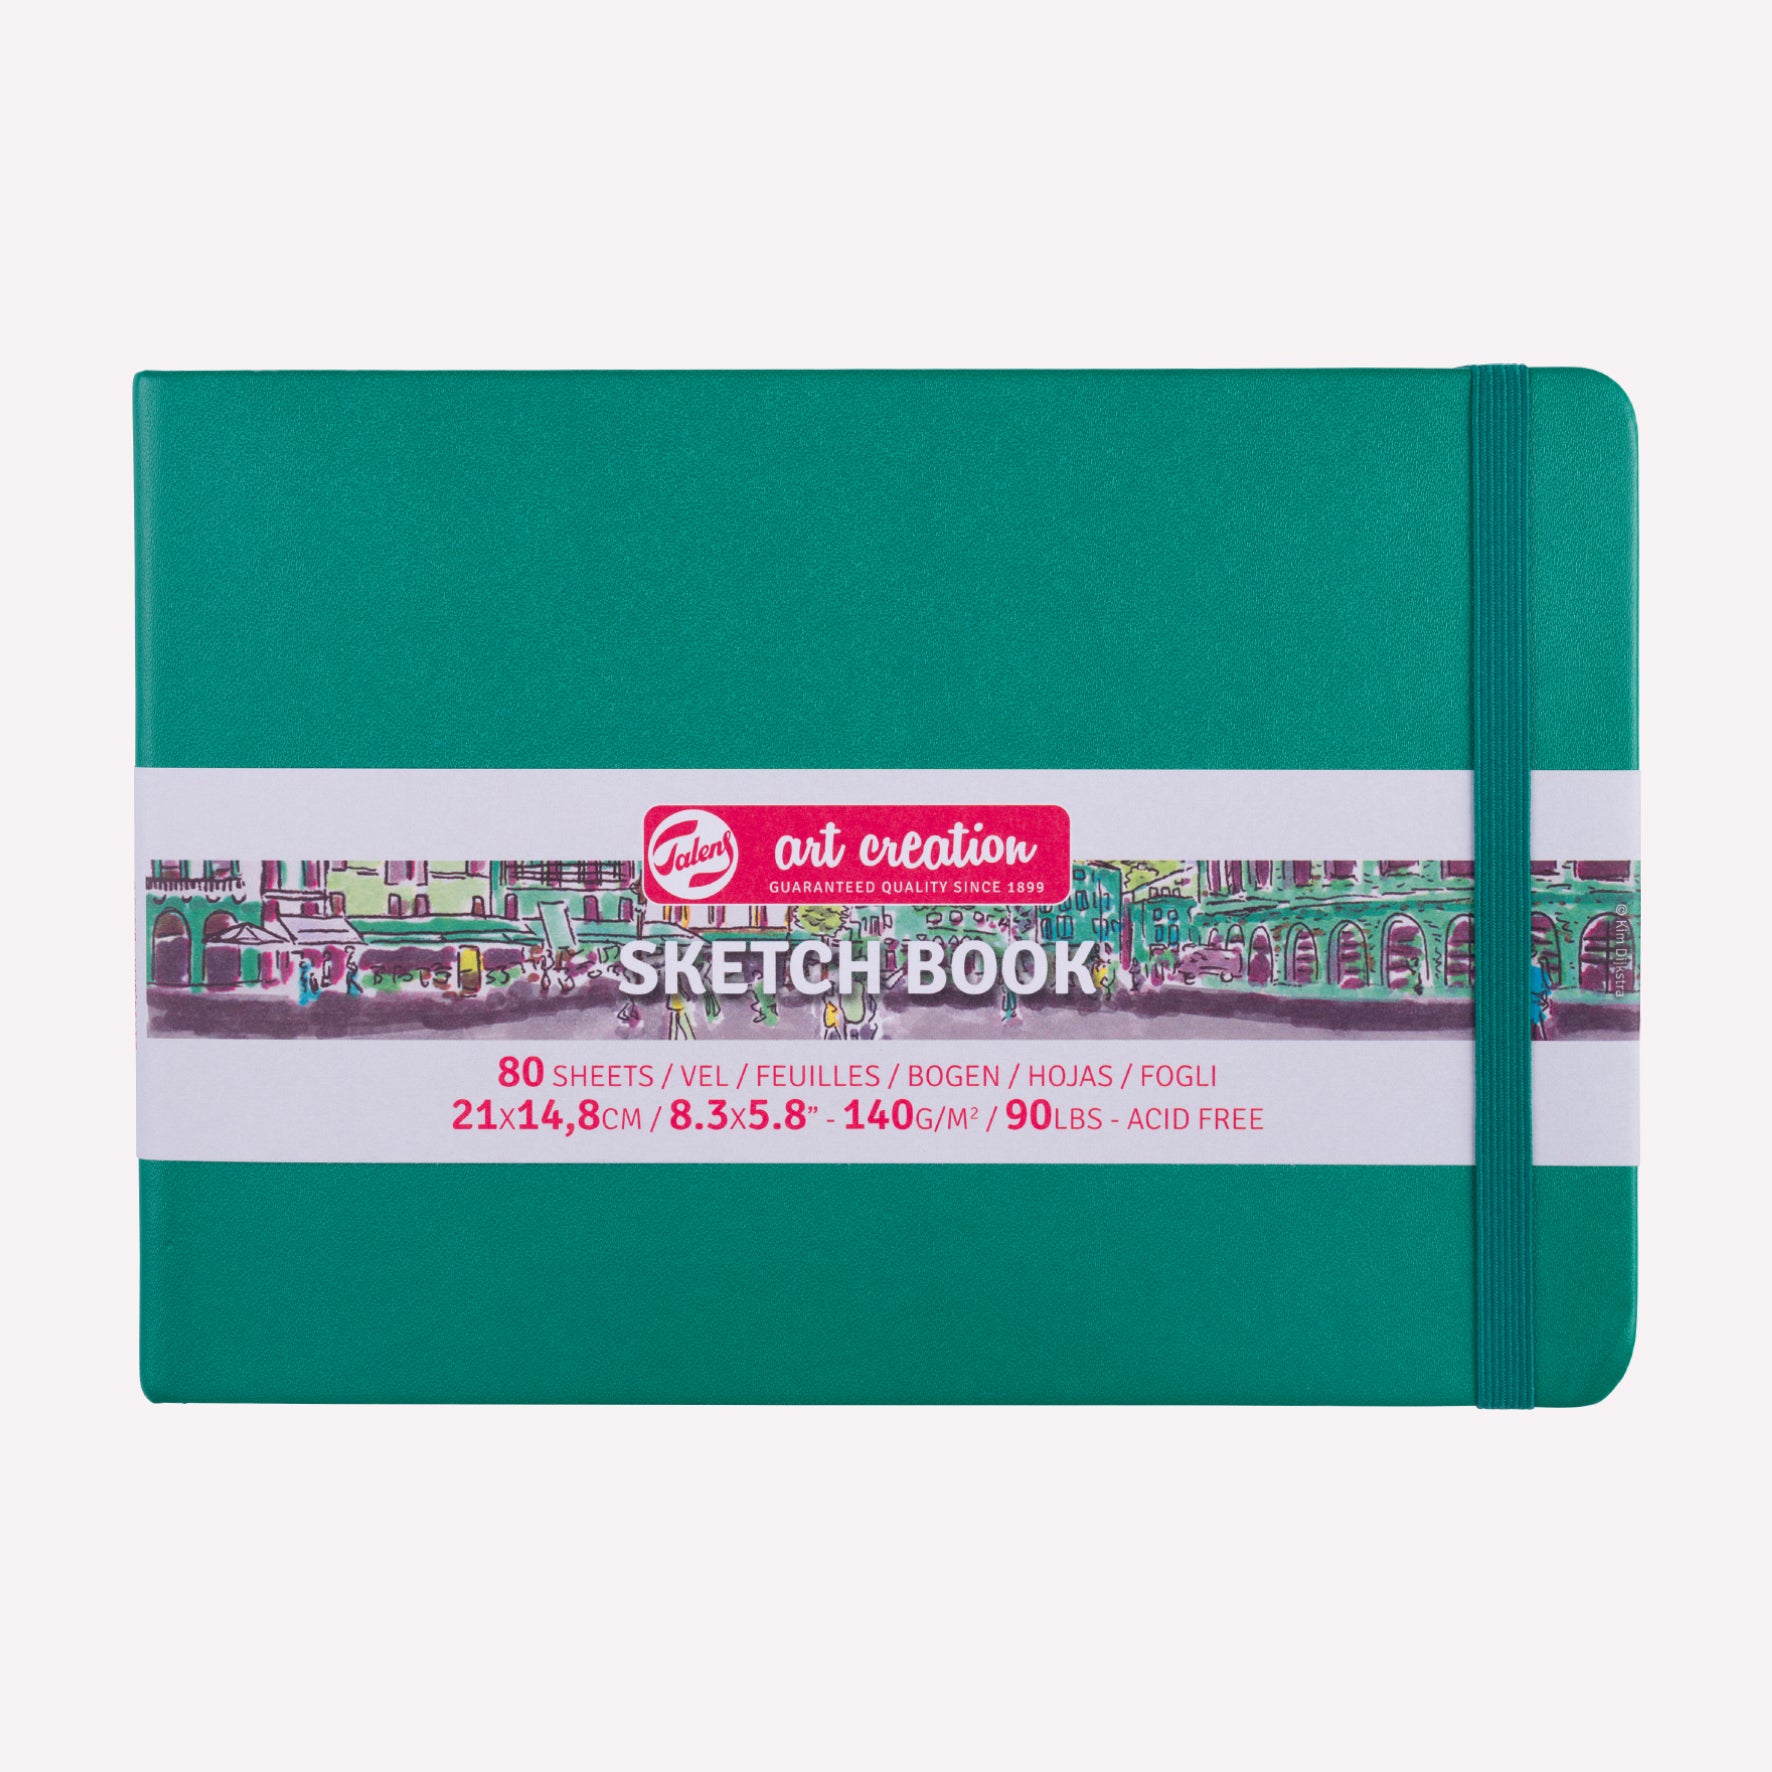 Royal Talens Art Creation landscape sketchbook with a sturdy Forest Green imitation-leather cover in size 21x14.8cm. 